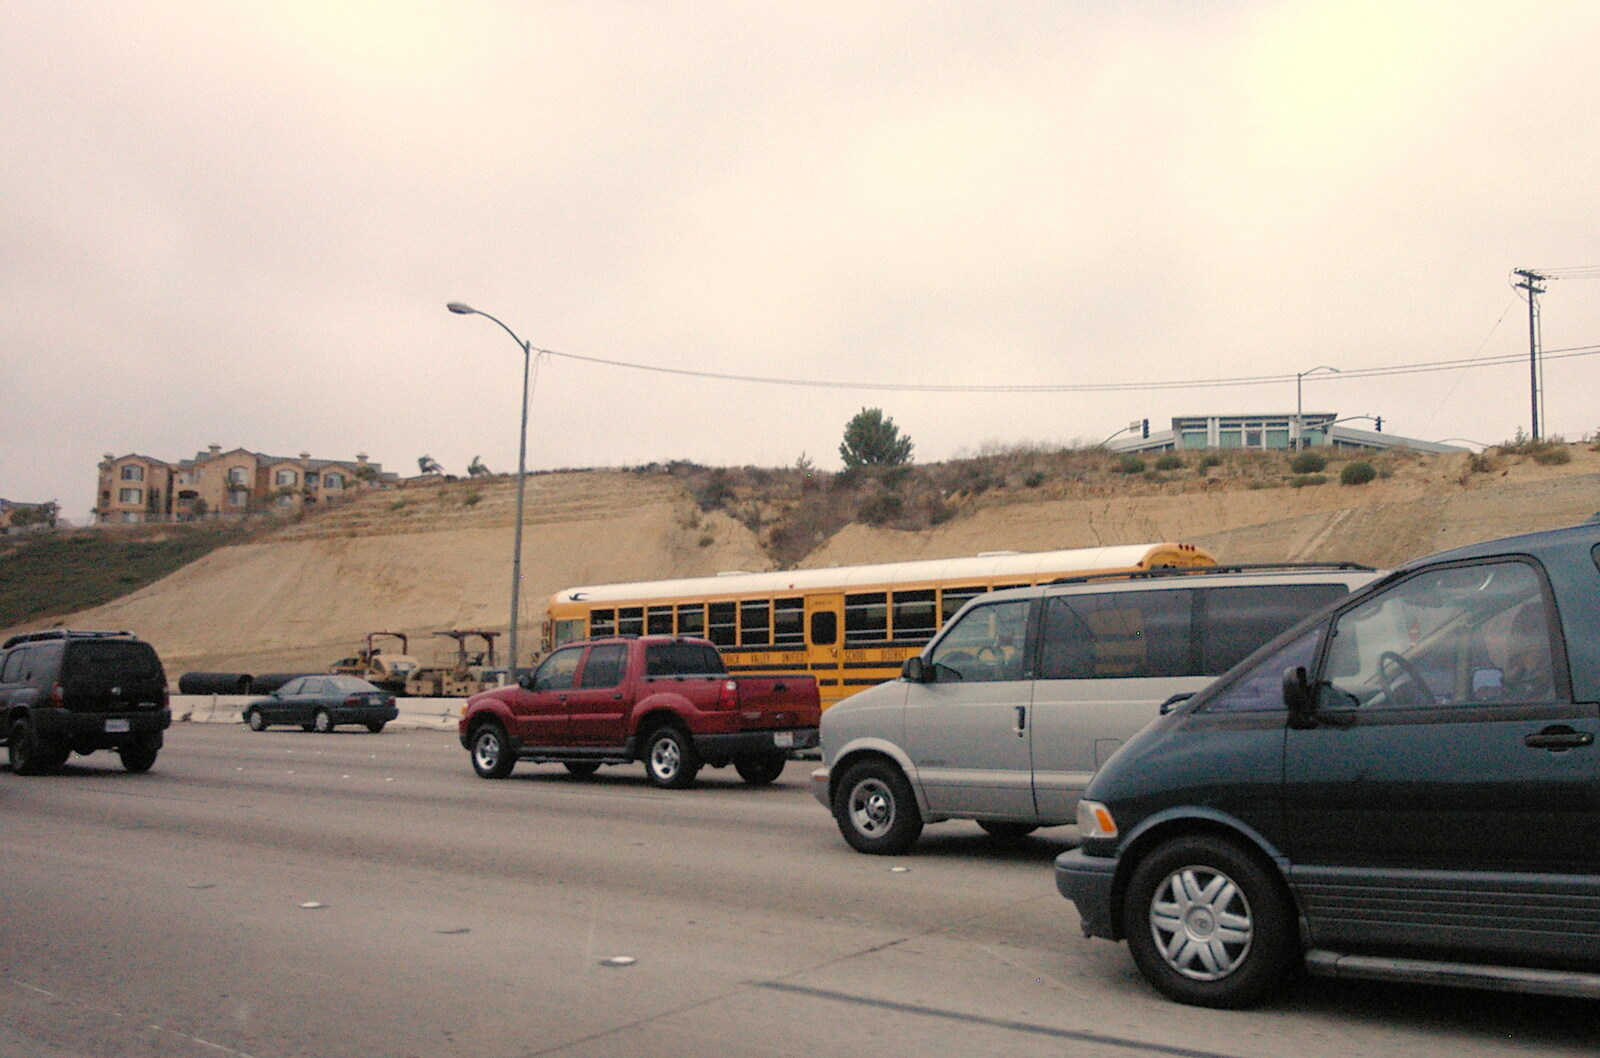 A school bus on the highway from Route 78: A Drive Around the San Diego Mountains, California, US - 9th August 2005